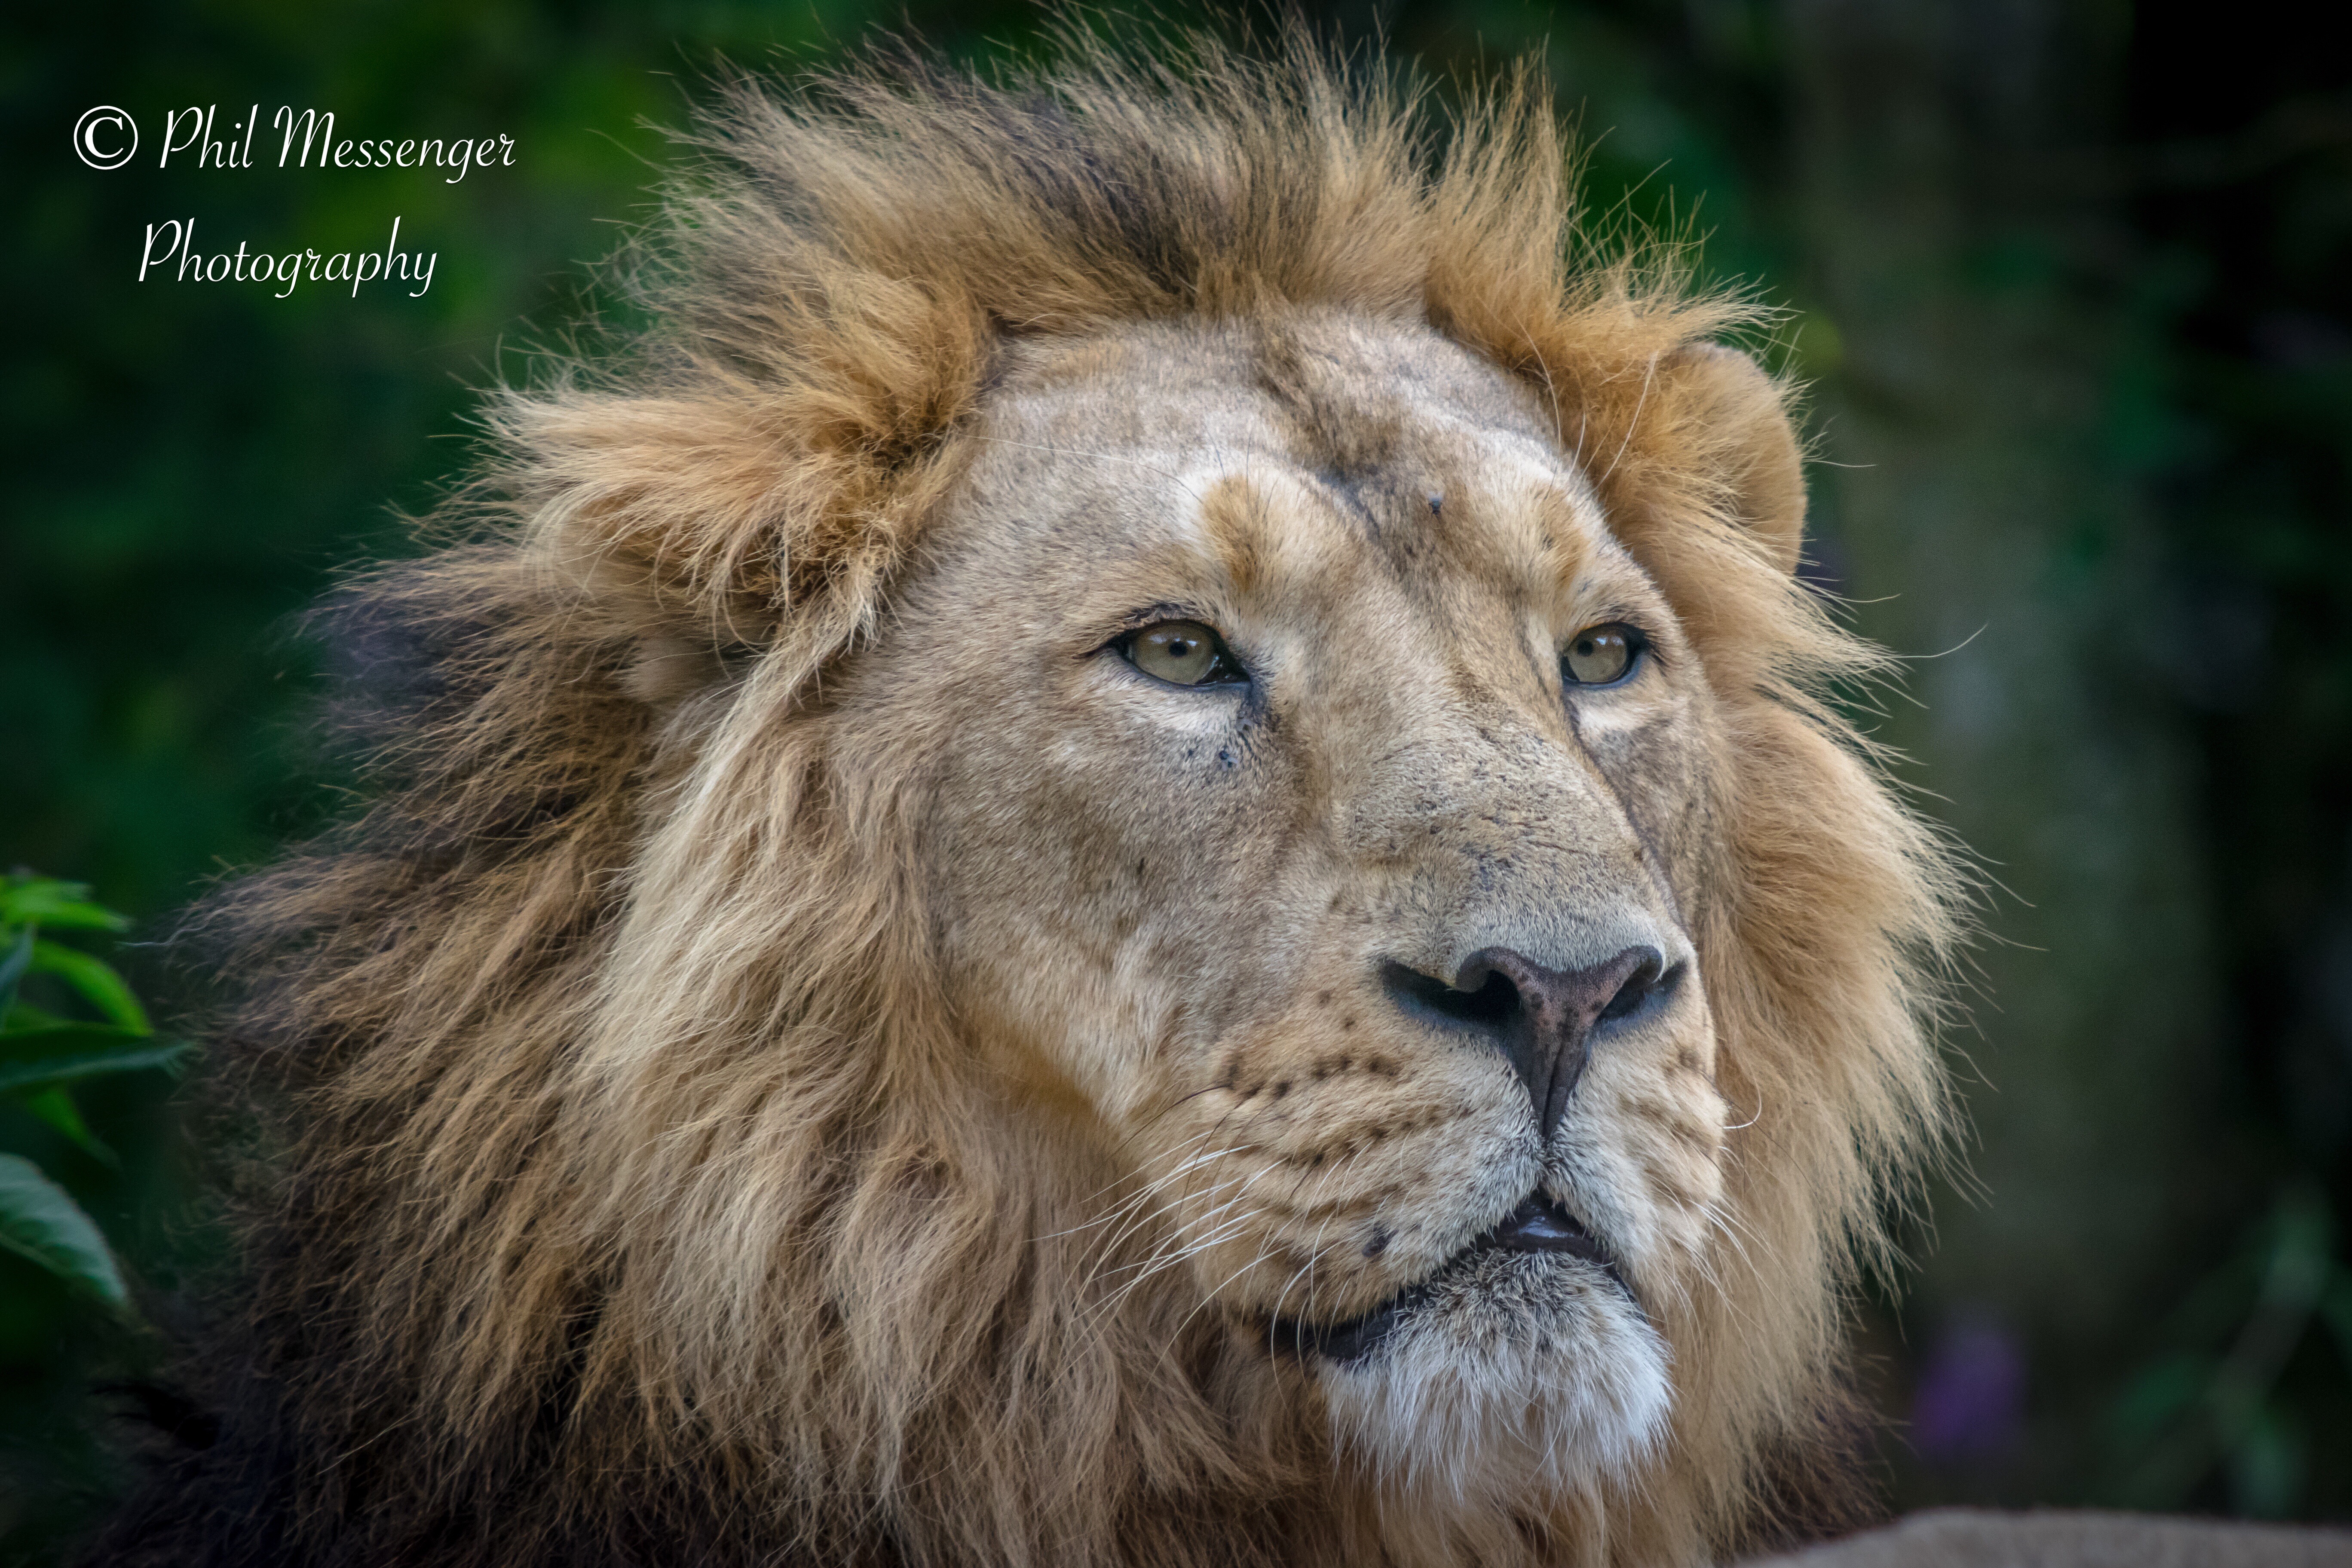 A male Asiatic lion (Panthera leo persicus) taken at Cotswold wildlife park, Burford, Oxfordshire.